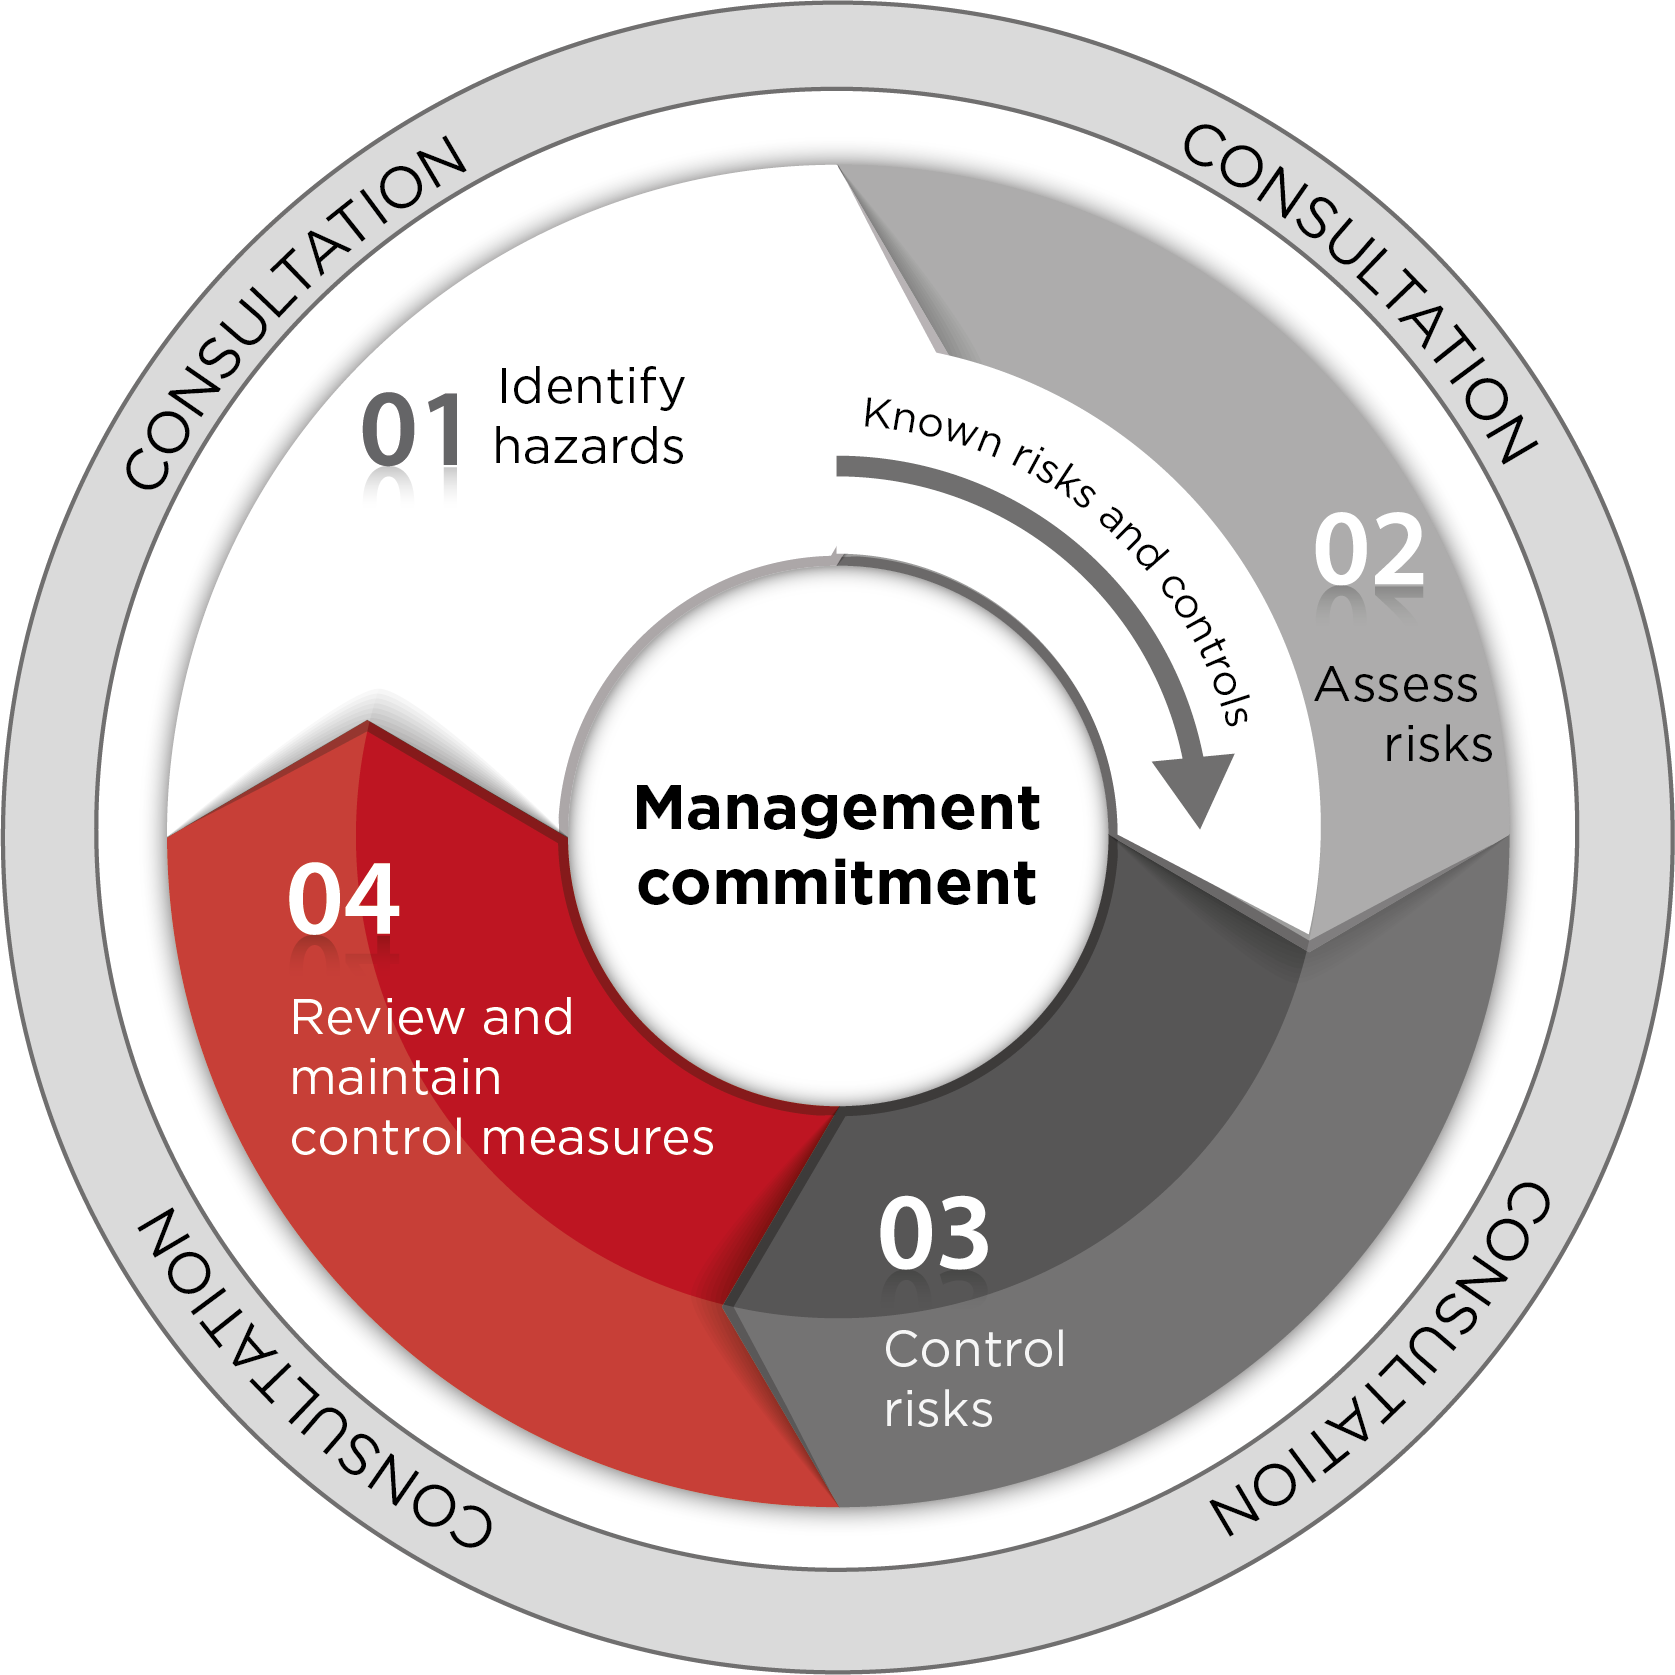 illustration of the risk management process outlining the four stages: identifying hazards, assessing risks, controlling risks, and reviewing and maintaining control measures